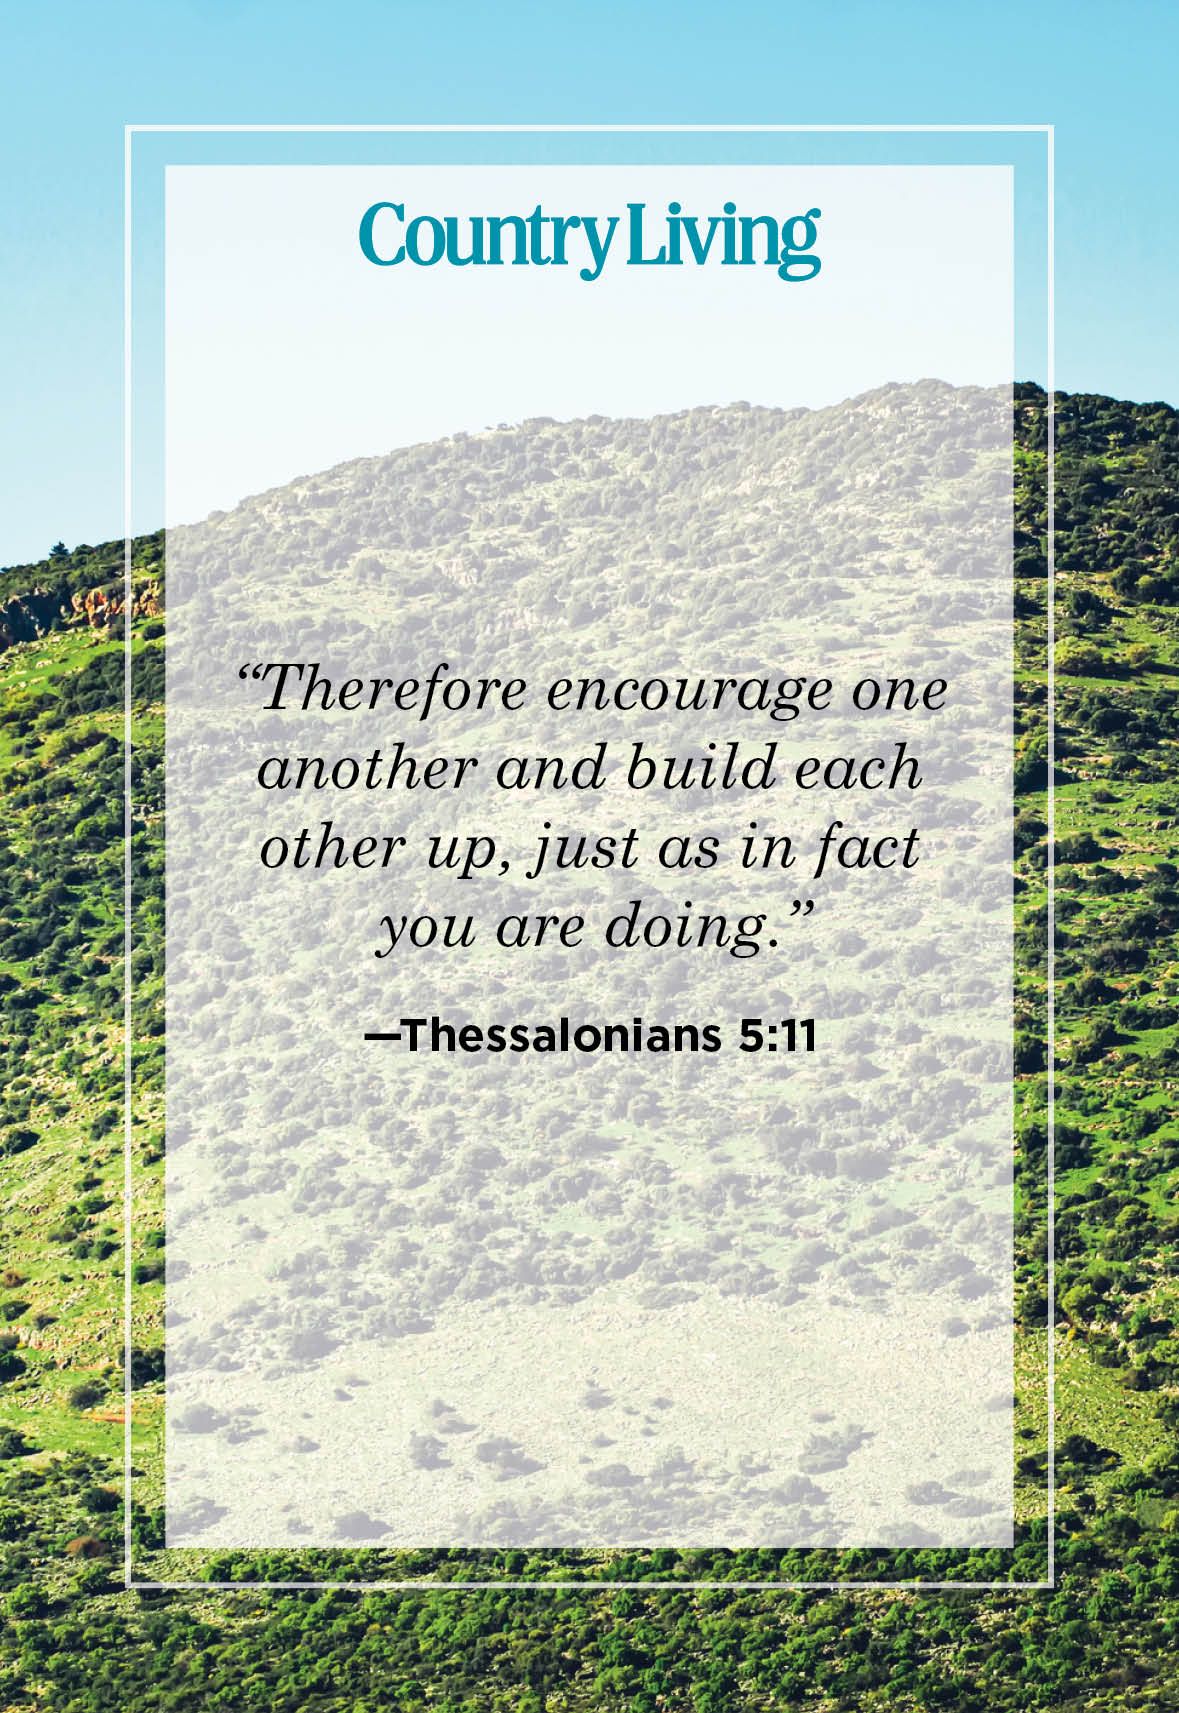 encourage one another and build each other up